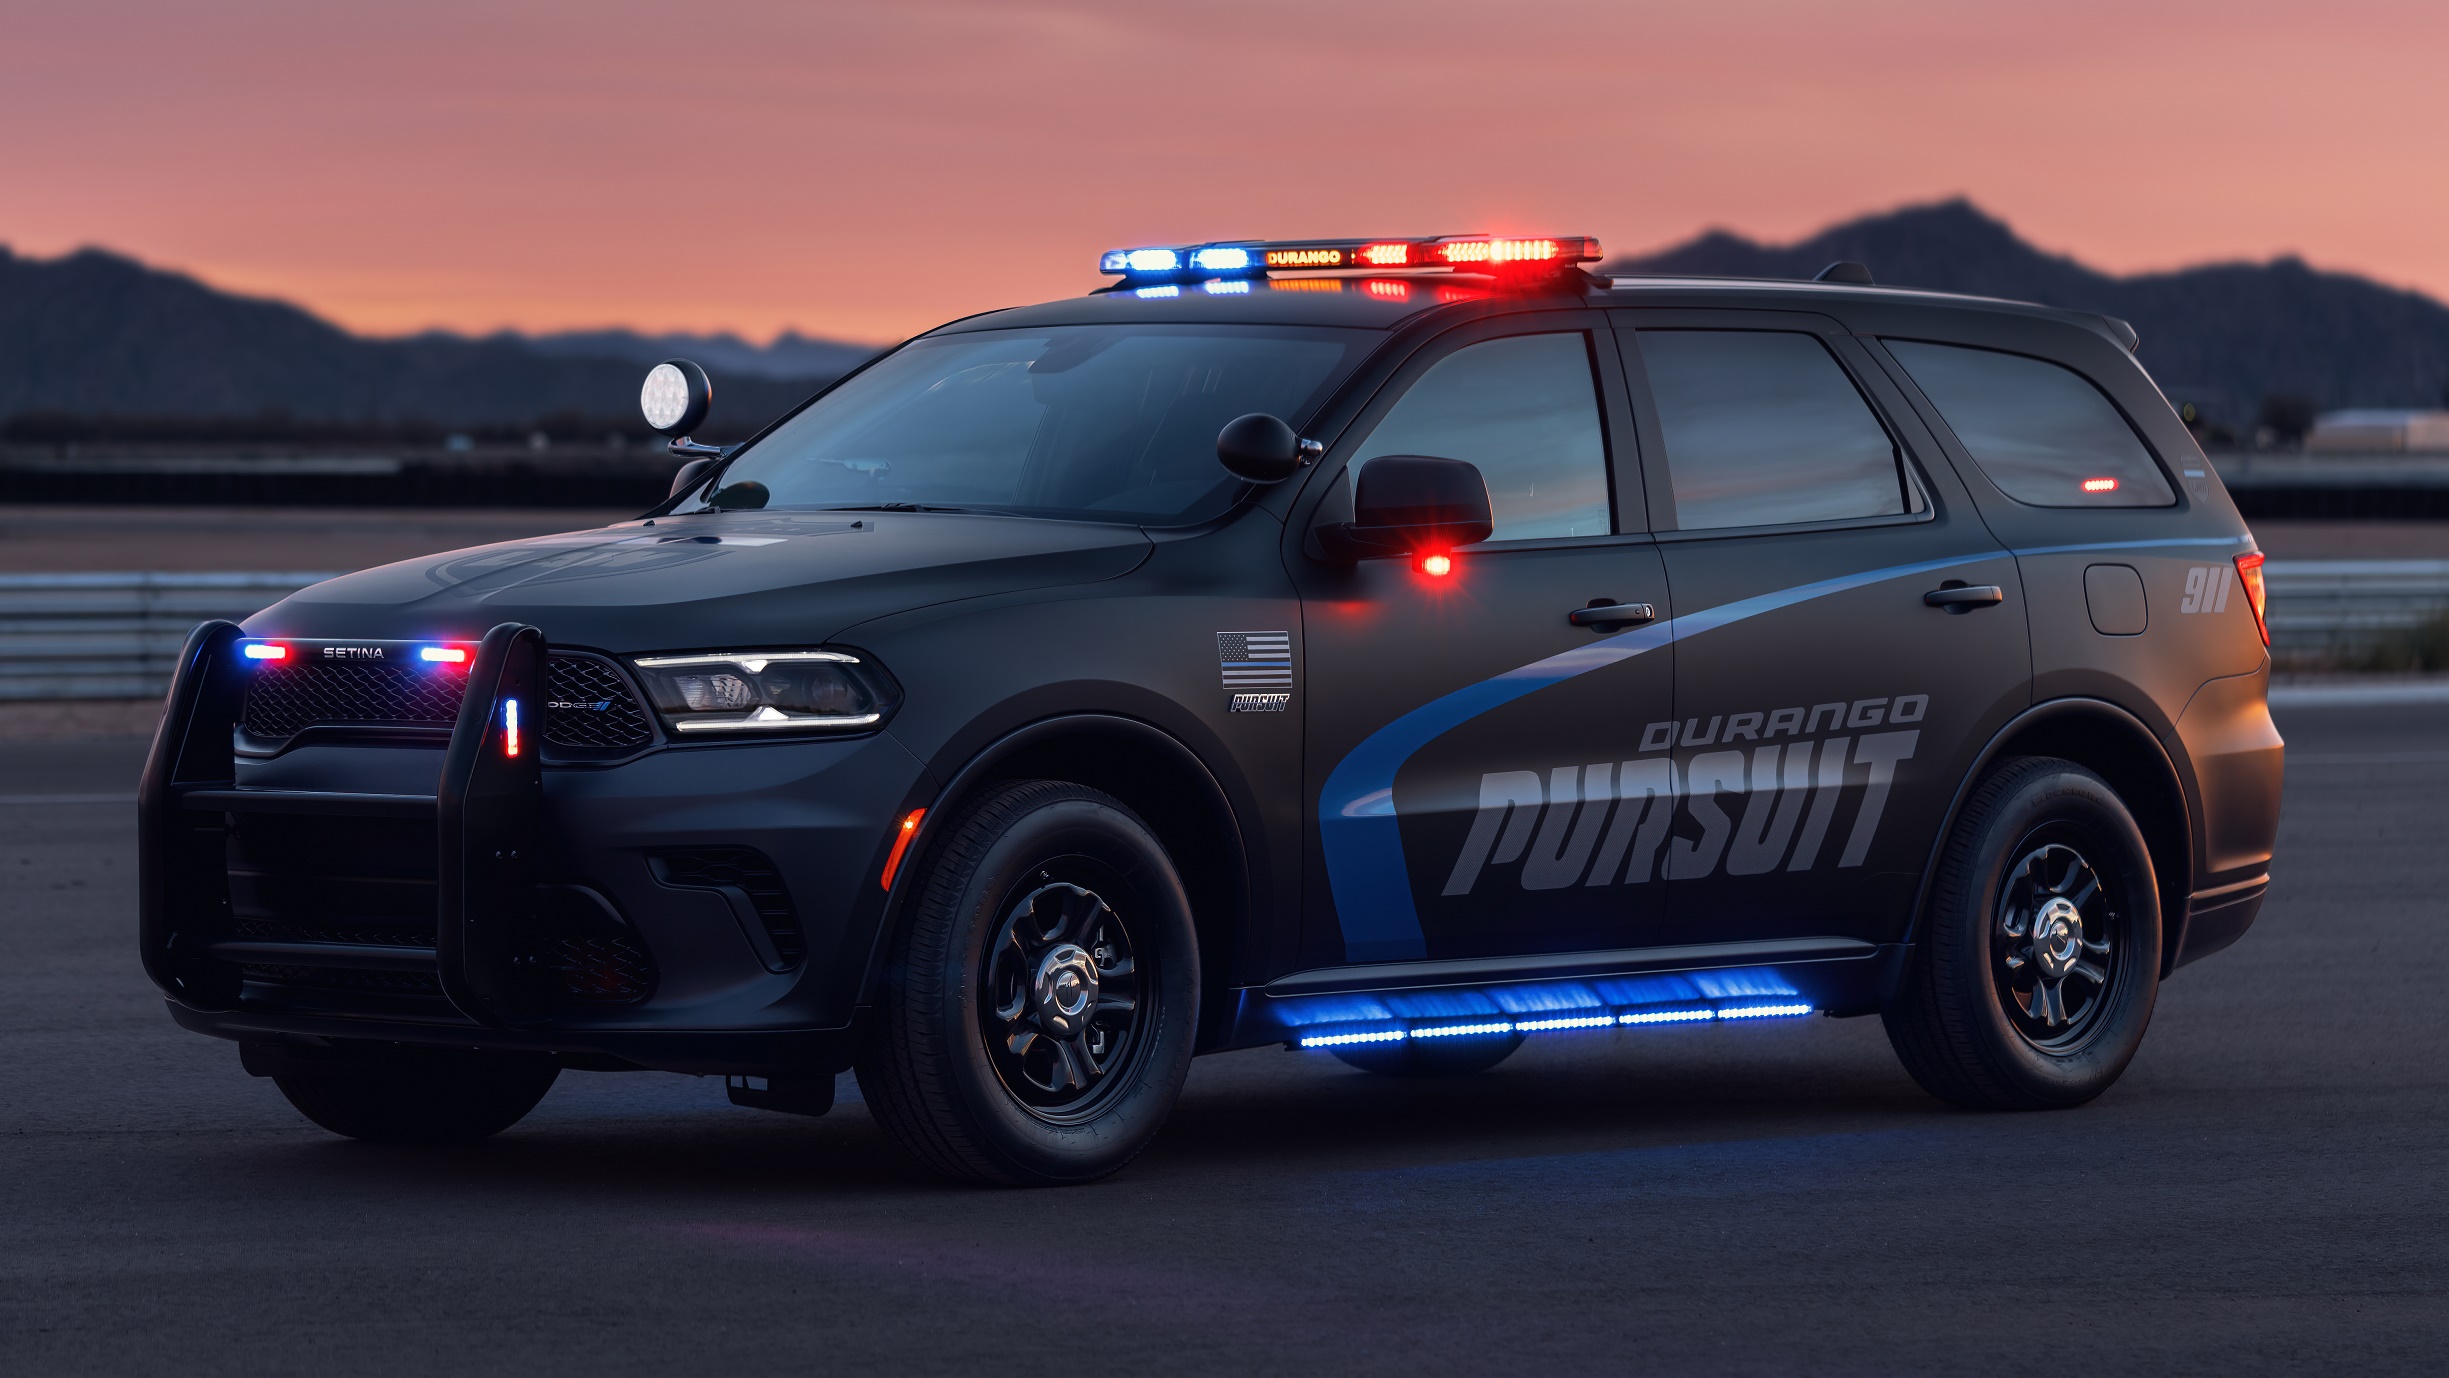 The Updated 2021 Dodge Durango Pursuit Reports For Duty MoparInsiders